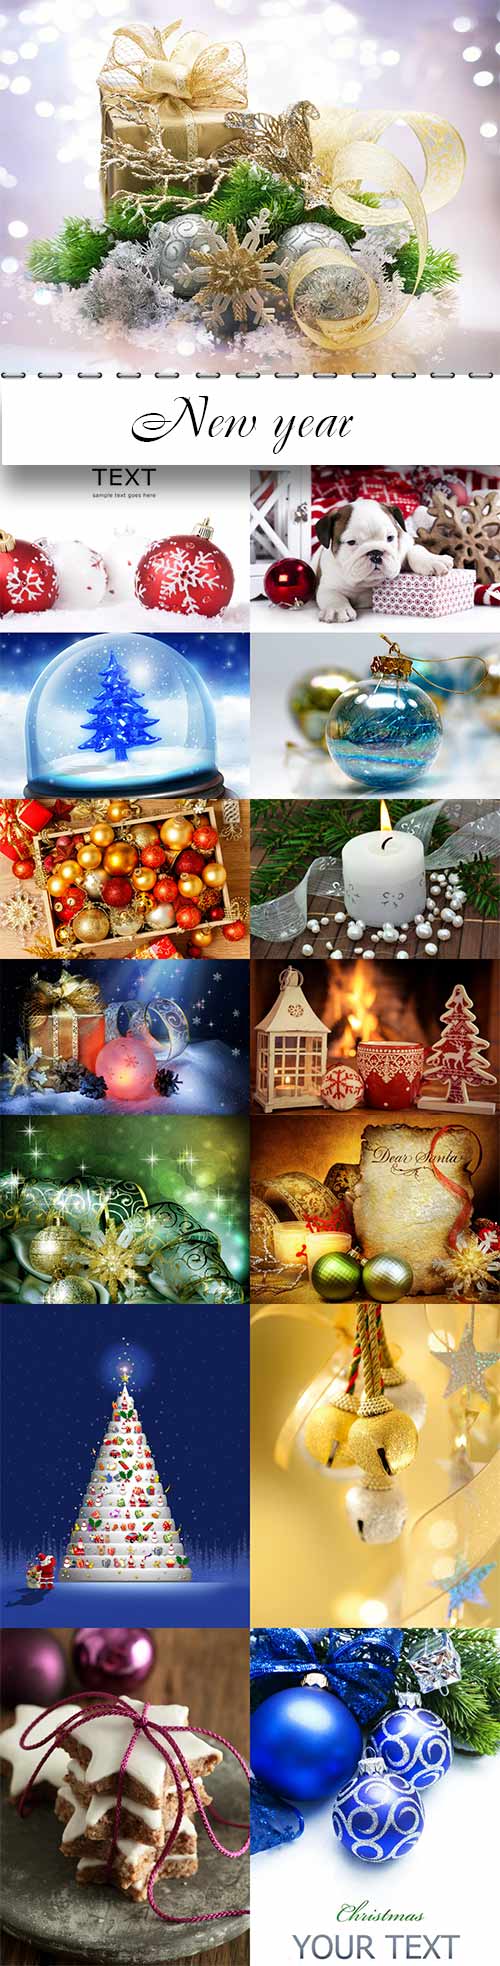 New year raster graphics collection